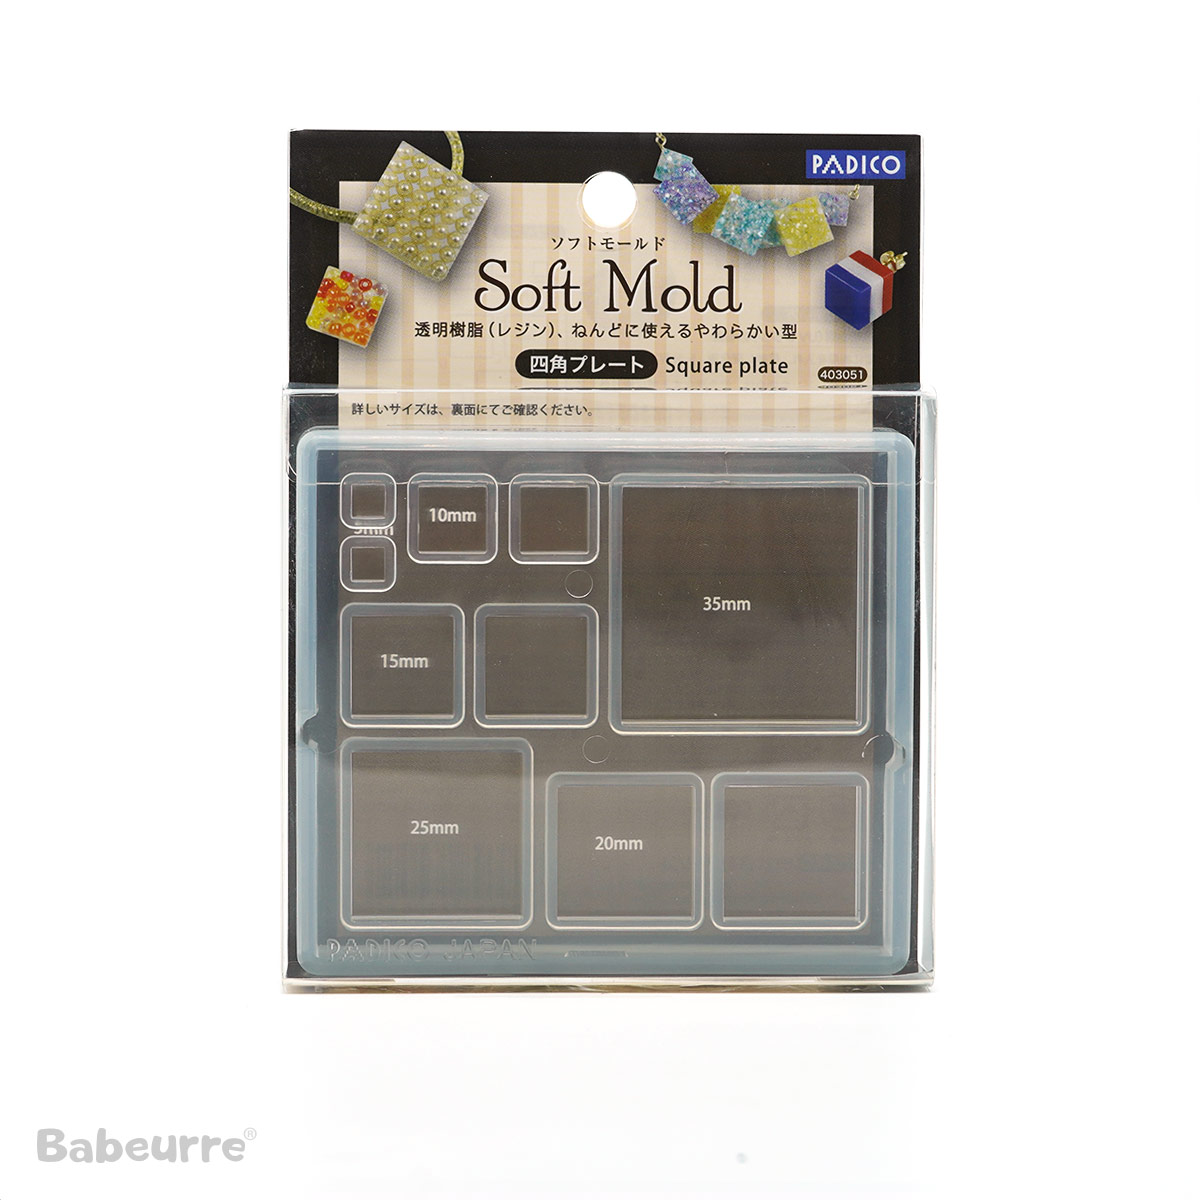 Soft Mold Square Plate